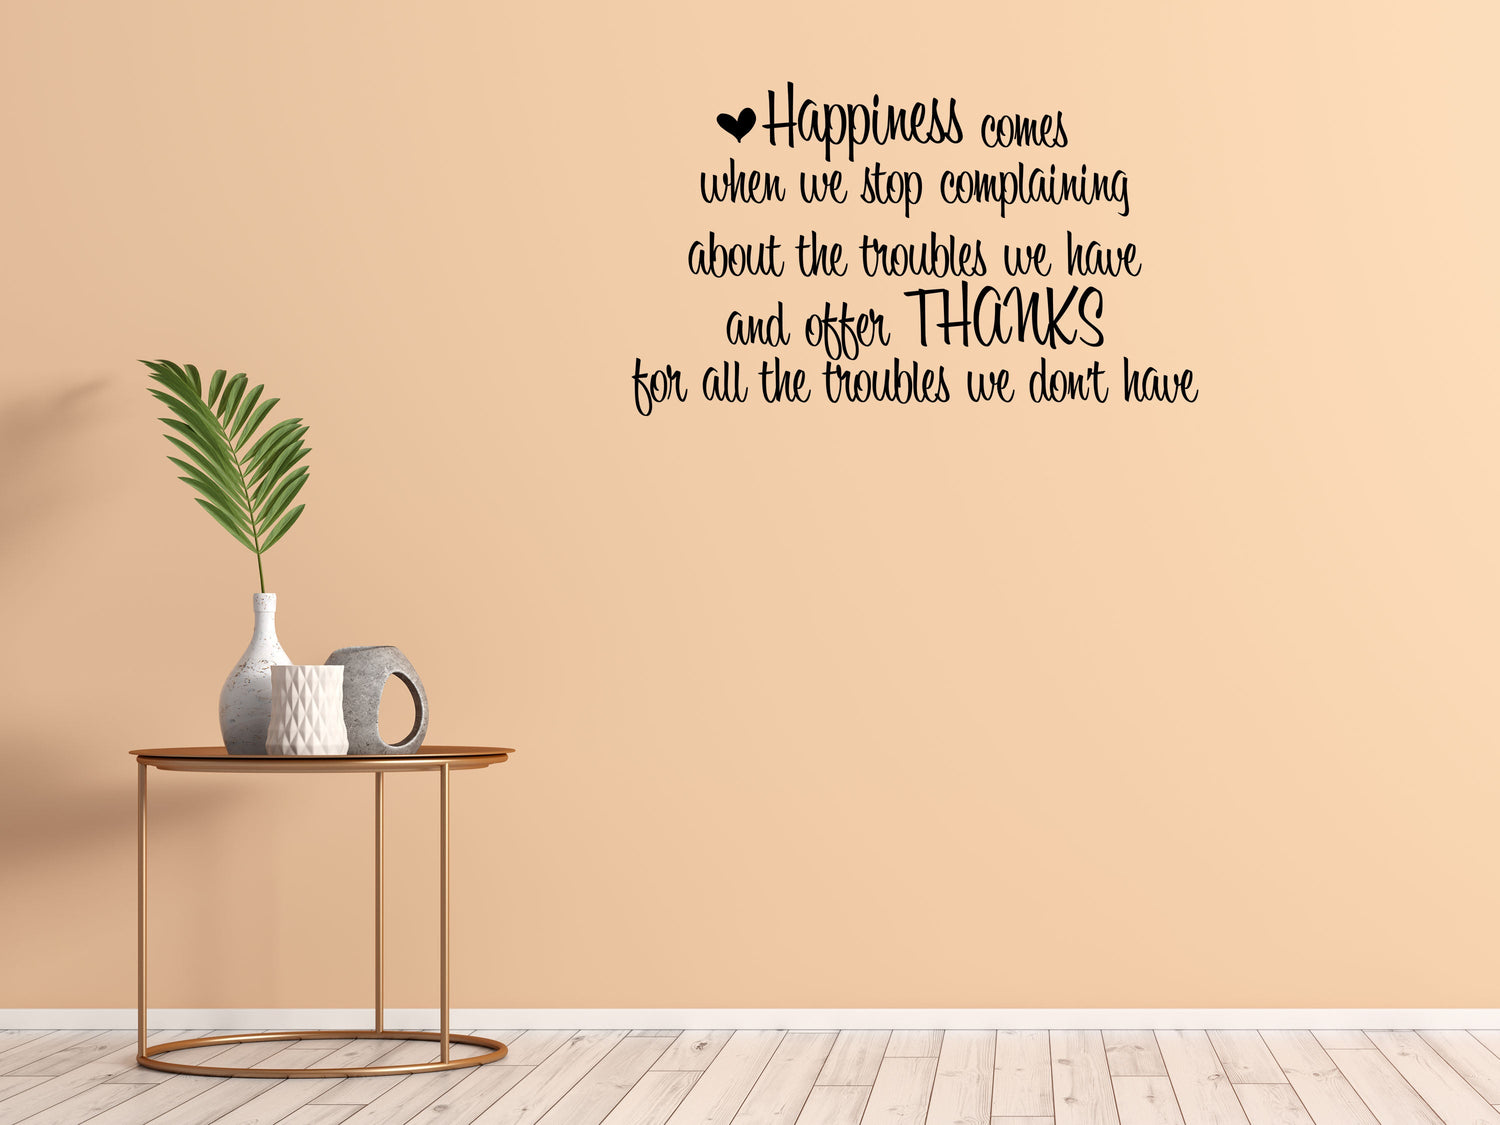 Happiness Comes Inspirational Wall Decal Quote - Motivational Wall Quote - Happy Decal Sticker - Thankful Wall Quote Decal Art Vinyl Wall Decal Inspirational Wall Signs 